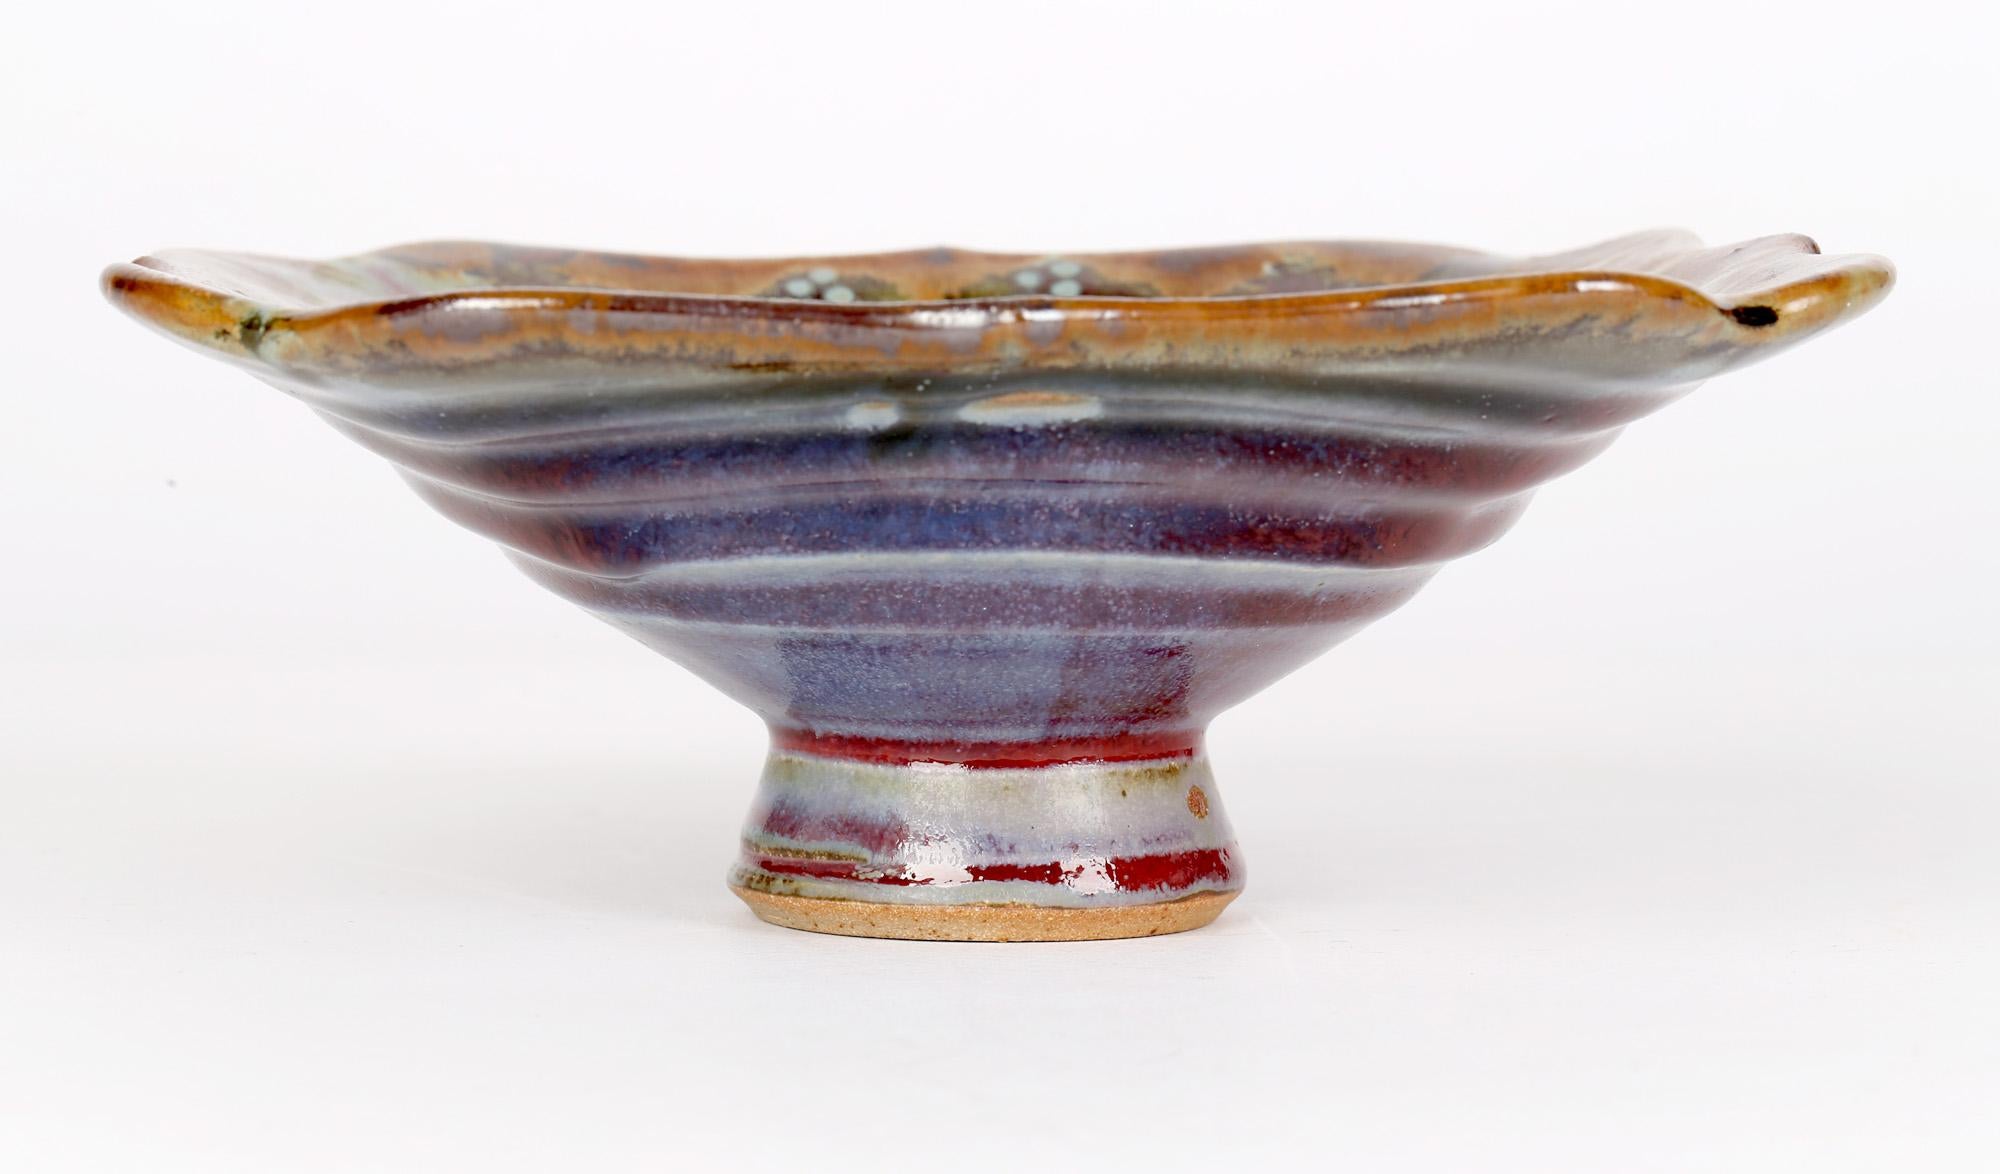 A stylish and well-made studio pottery pedestal dish decorated in multiple glazes by renowned Lancashire based potter John Calver and dating from the 20th or early 21st century.
John has been making stoneware pottery in the North Lancashire village